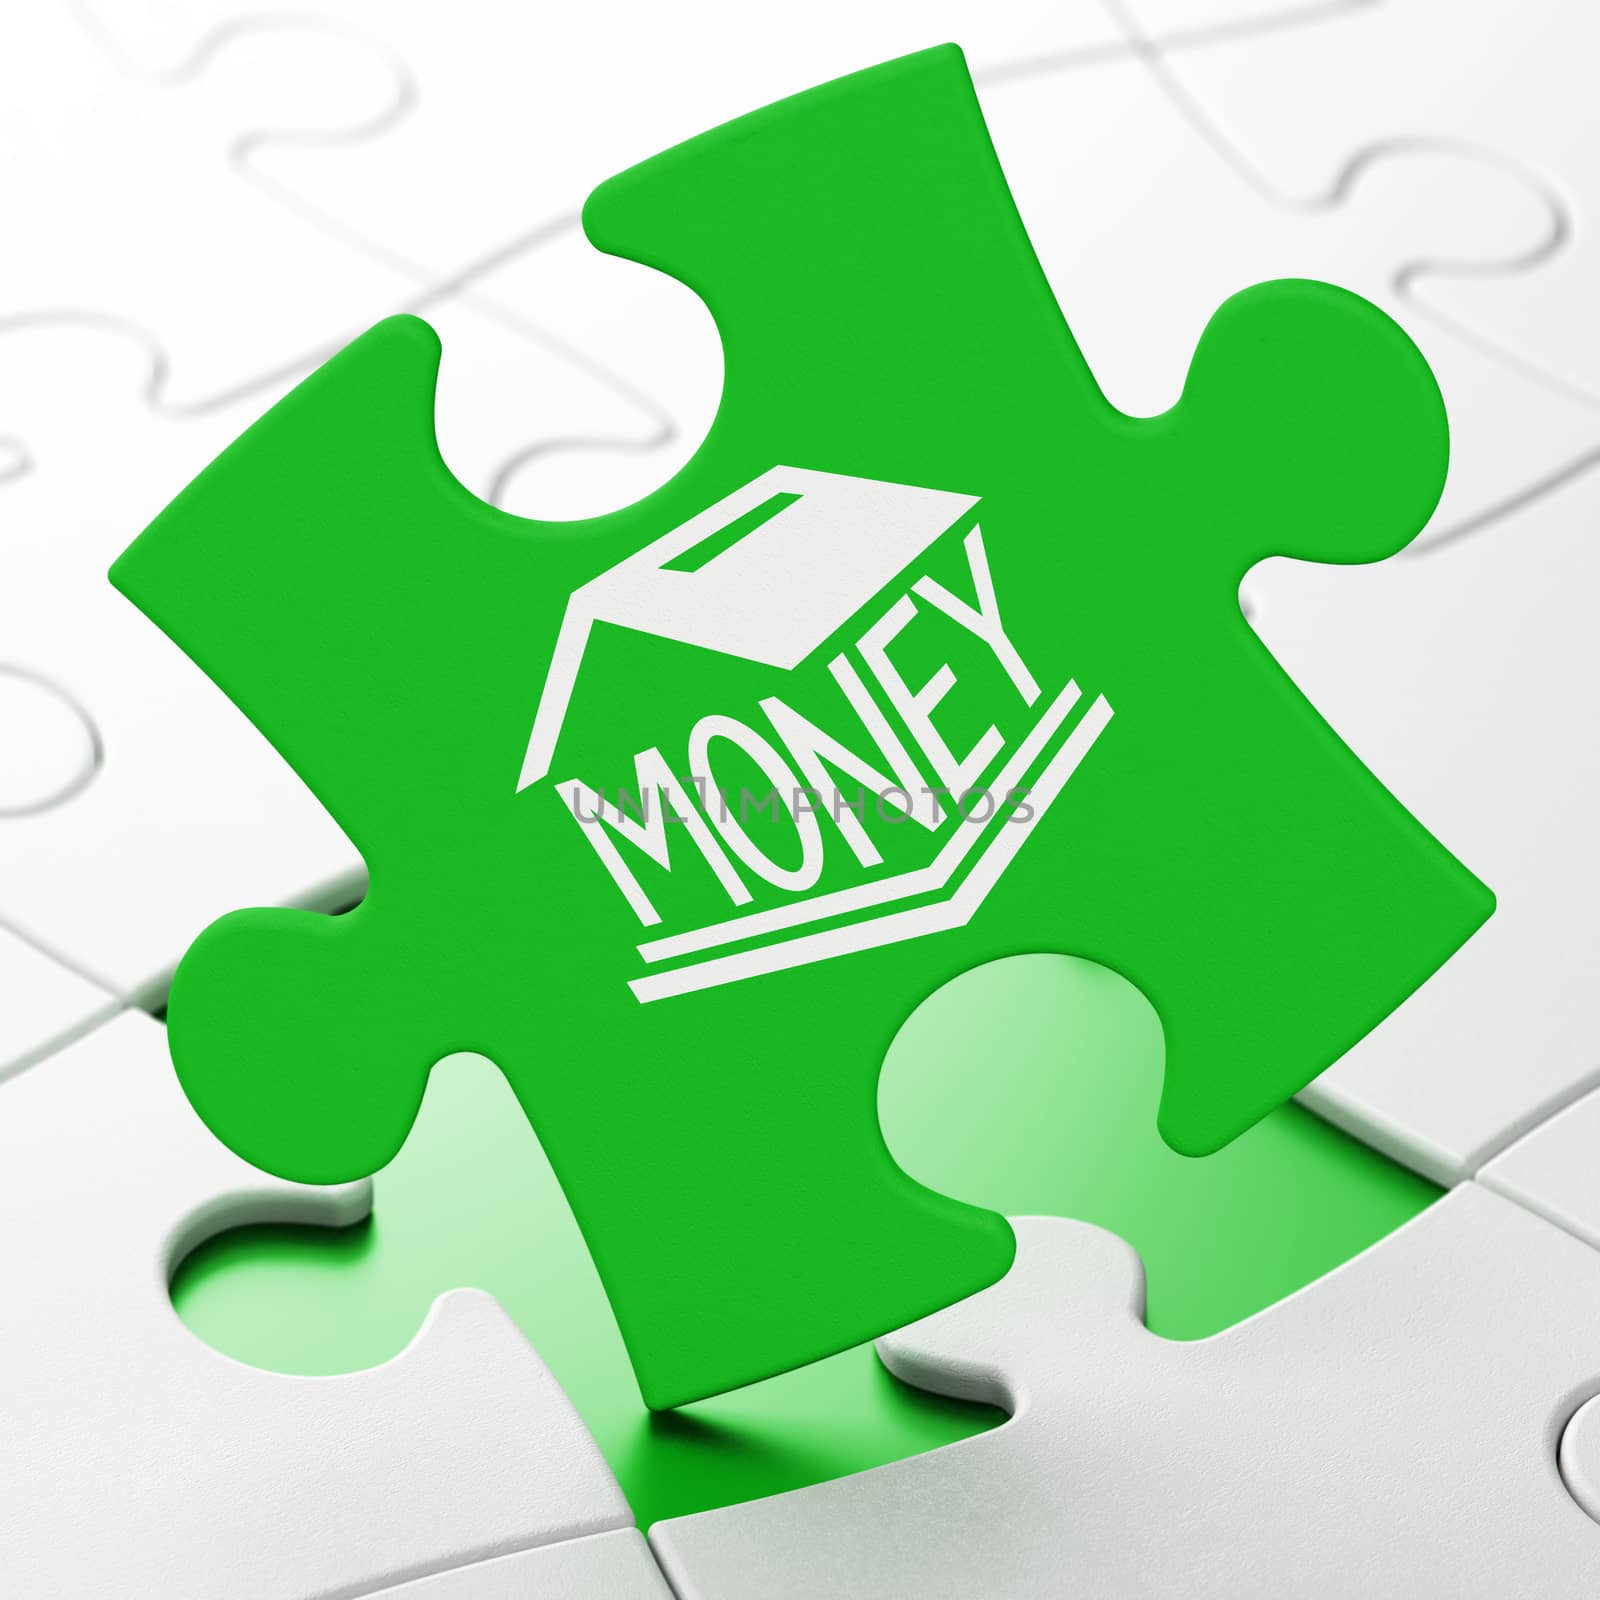 Banking concept: Money Box on Green puzzle pieces background, 3D rendering